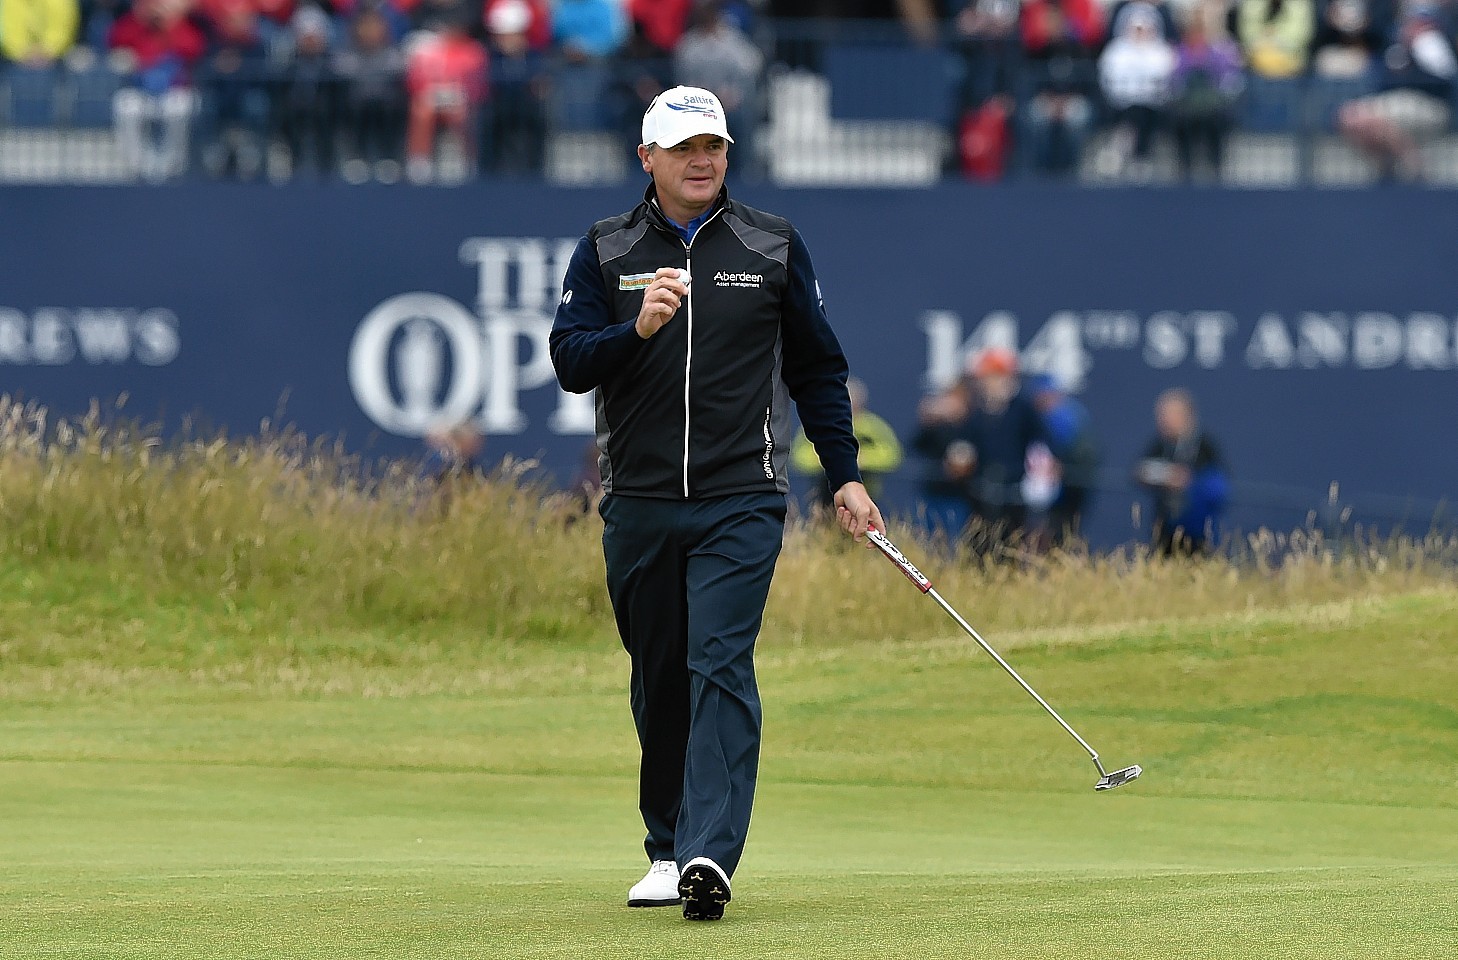 Scotland's Paul Lawrie during day four of The Open Championship 2015 at St Andrews